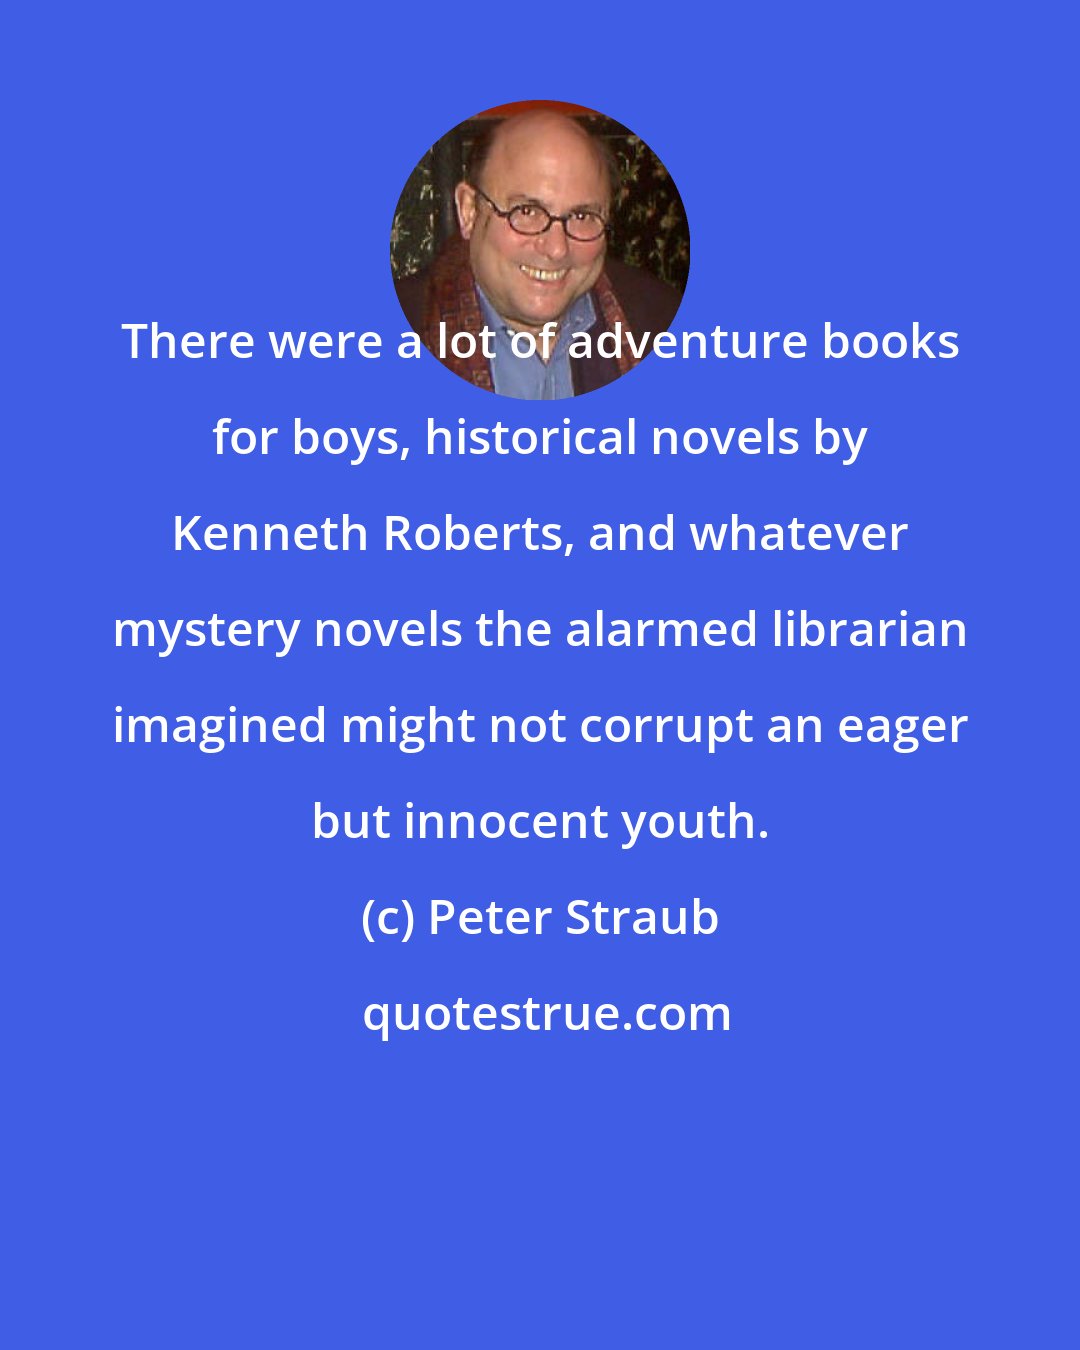 Peter Straub: There were a lot of adventure books for boys, historical novels by Kenneth Roberts, and whatever mystery novels the alarmed librarian imagined might not corrupt an eager but innocent youth.